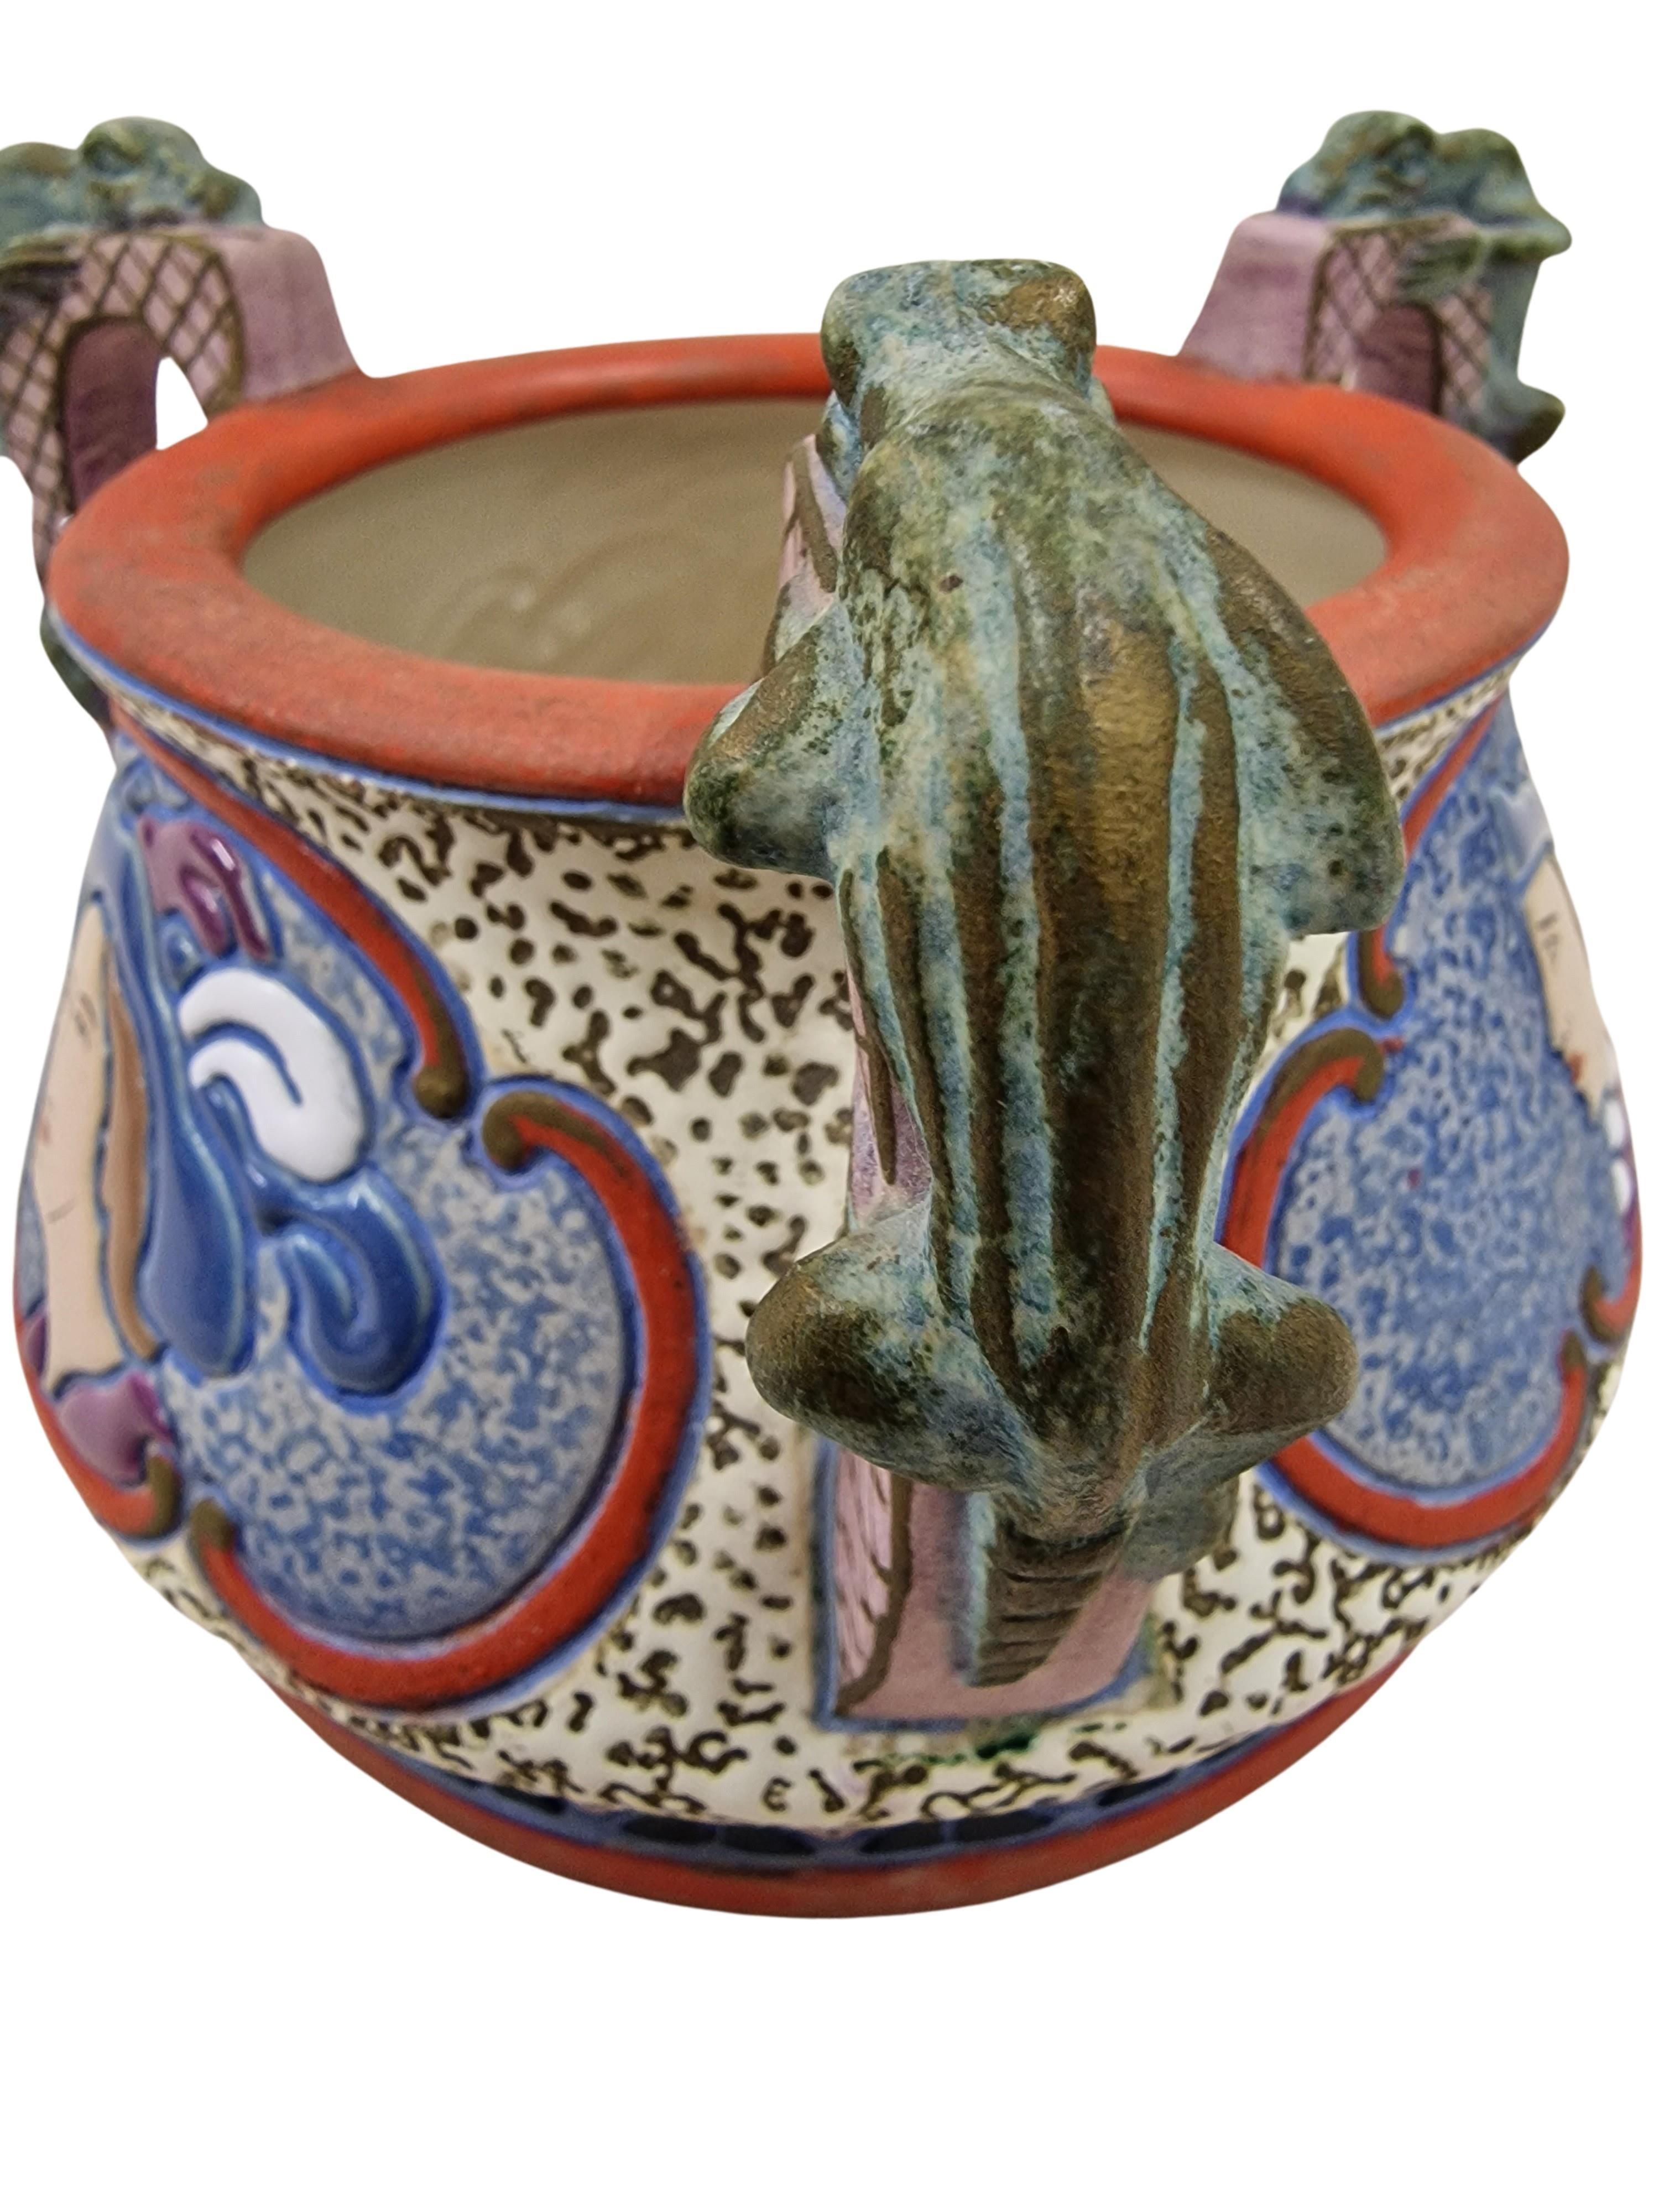 Ceramic Pot, Bowl, Jardiniere, Three Musketeers, Dumas, Amphora, 1920, Bohemia In Good Condition For Sale In Wien, AT